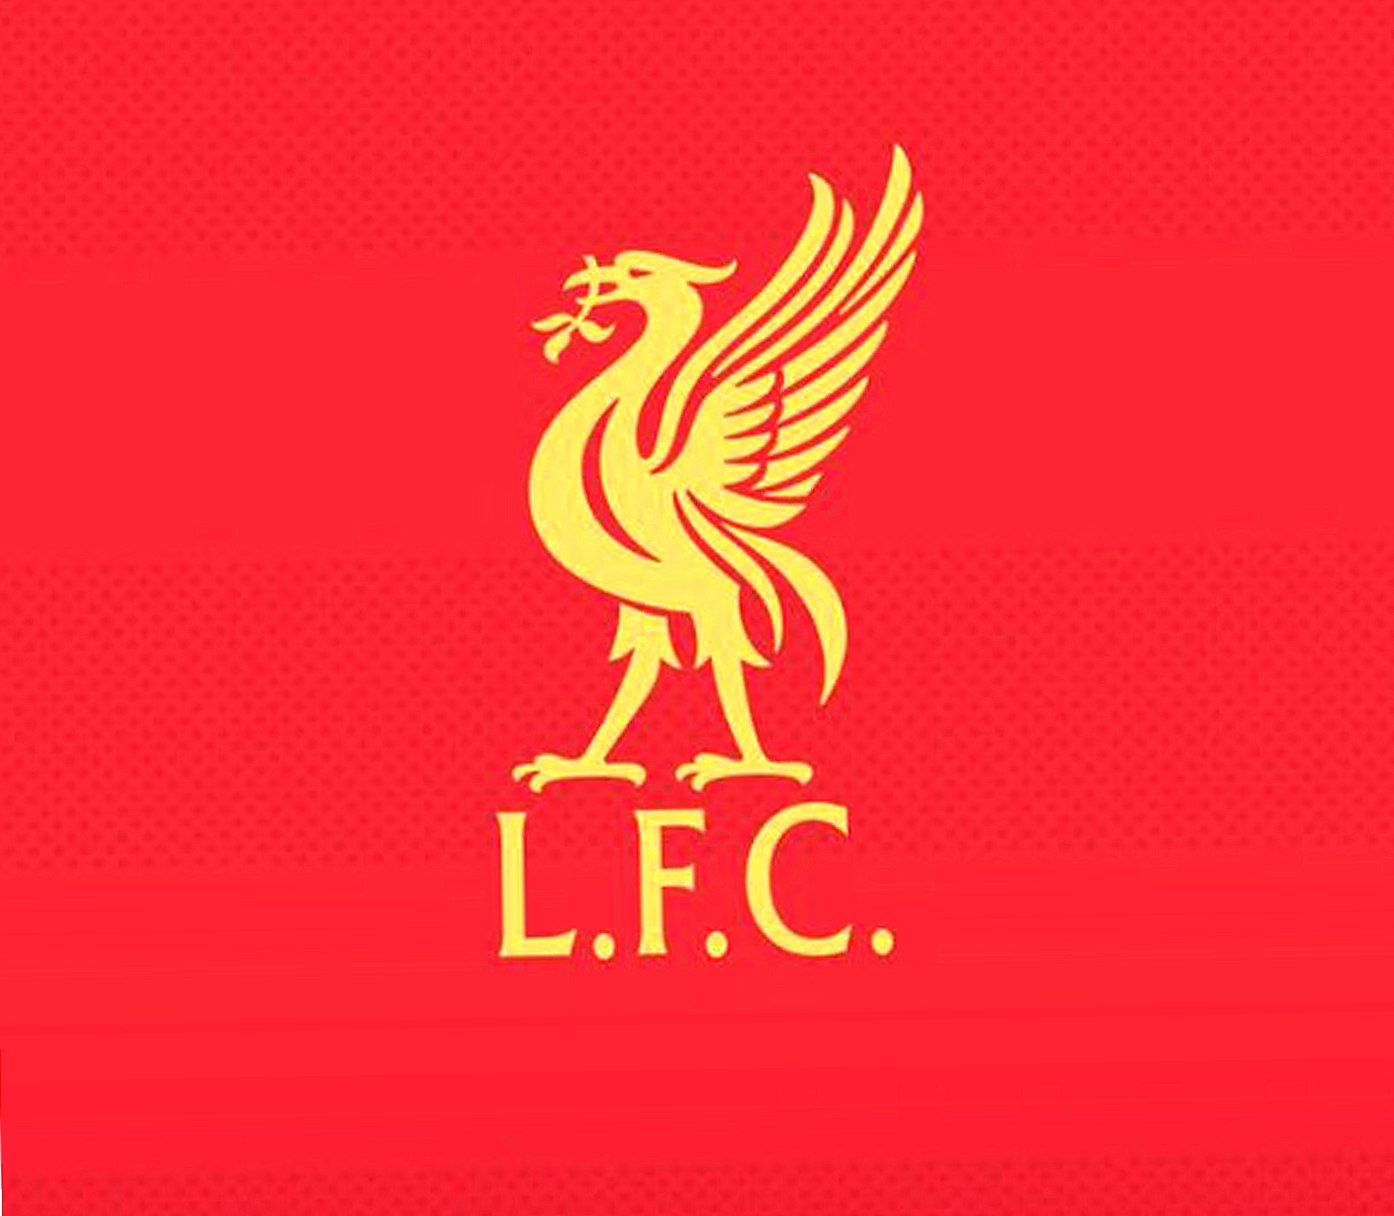 liverpool logo 2017 wallpapers HD quality